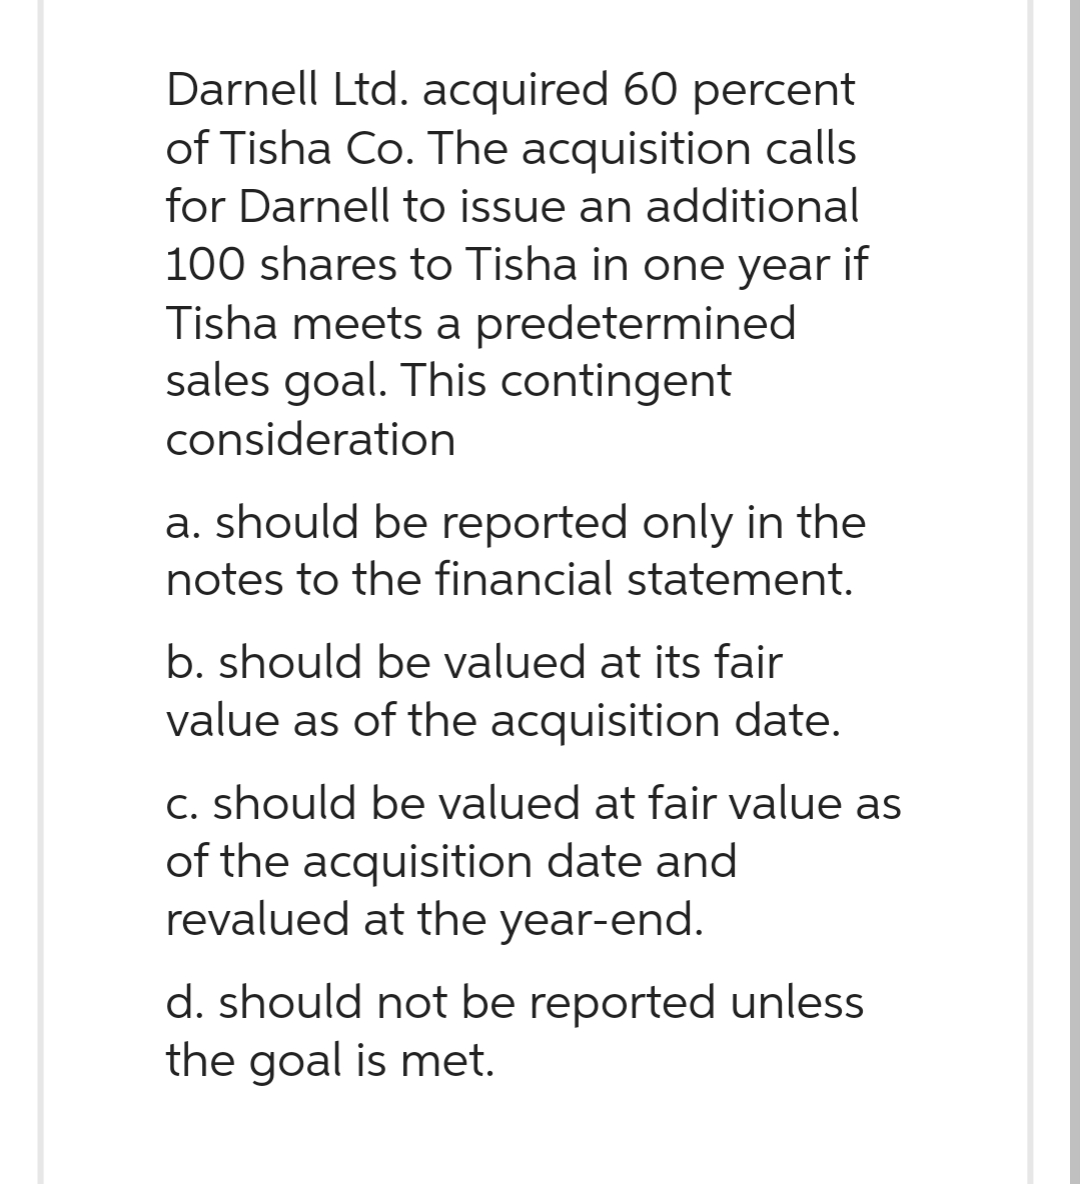 Darnell Ltd. acquired 60 percent
of Tisha Co. The acquisition calls
for Darnell to issue an additional
100 shares to Tisha in one year if
Tisha meets a predetermined
sales goal. This contingent
consideration
a. should be reported only in the
notes to the financial statement.
b. should be valued at its fair
value as of the acquisition date.
c. should be valued at fair value as
of the acquisition date and
revalued at the year-end.
d. should not be reported unless
the goal is met.